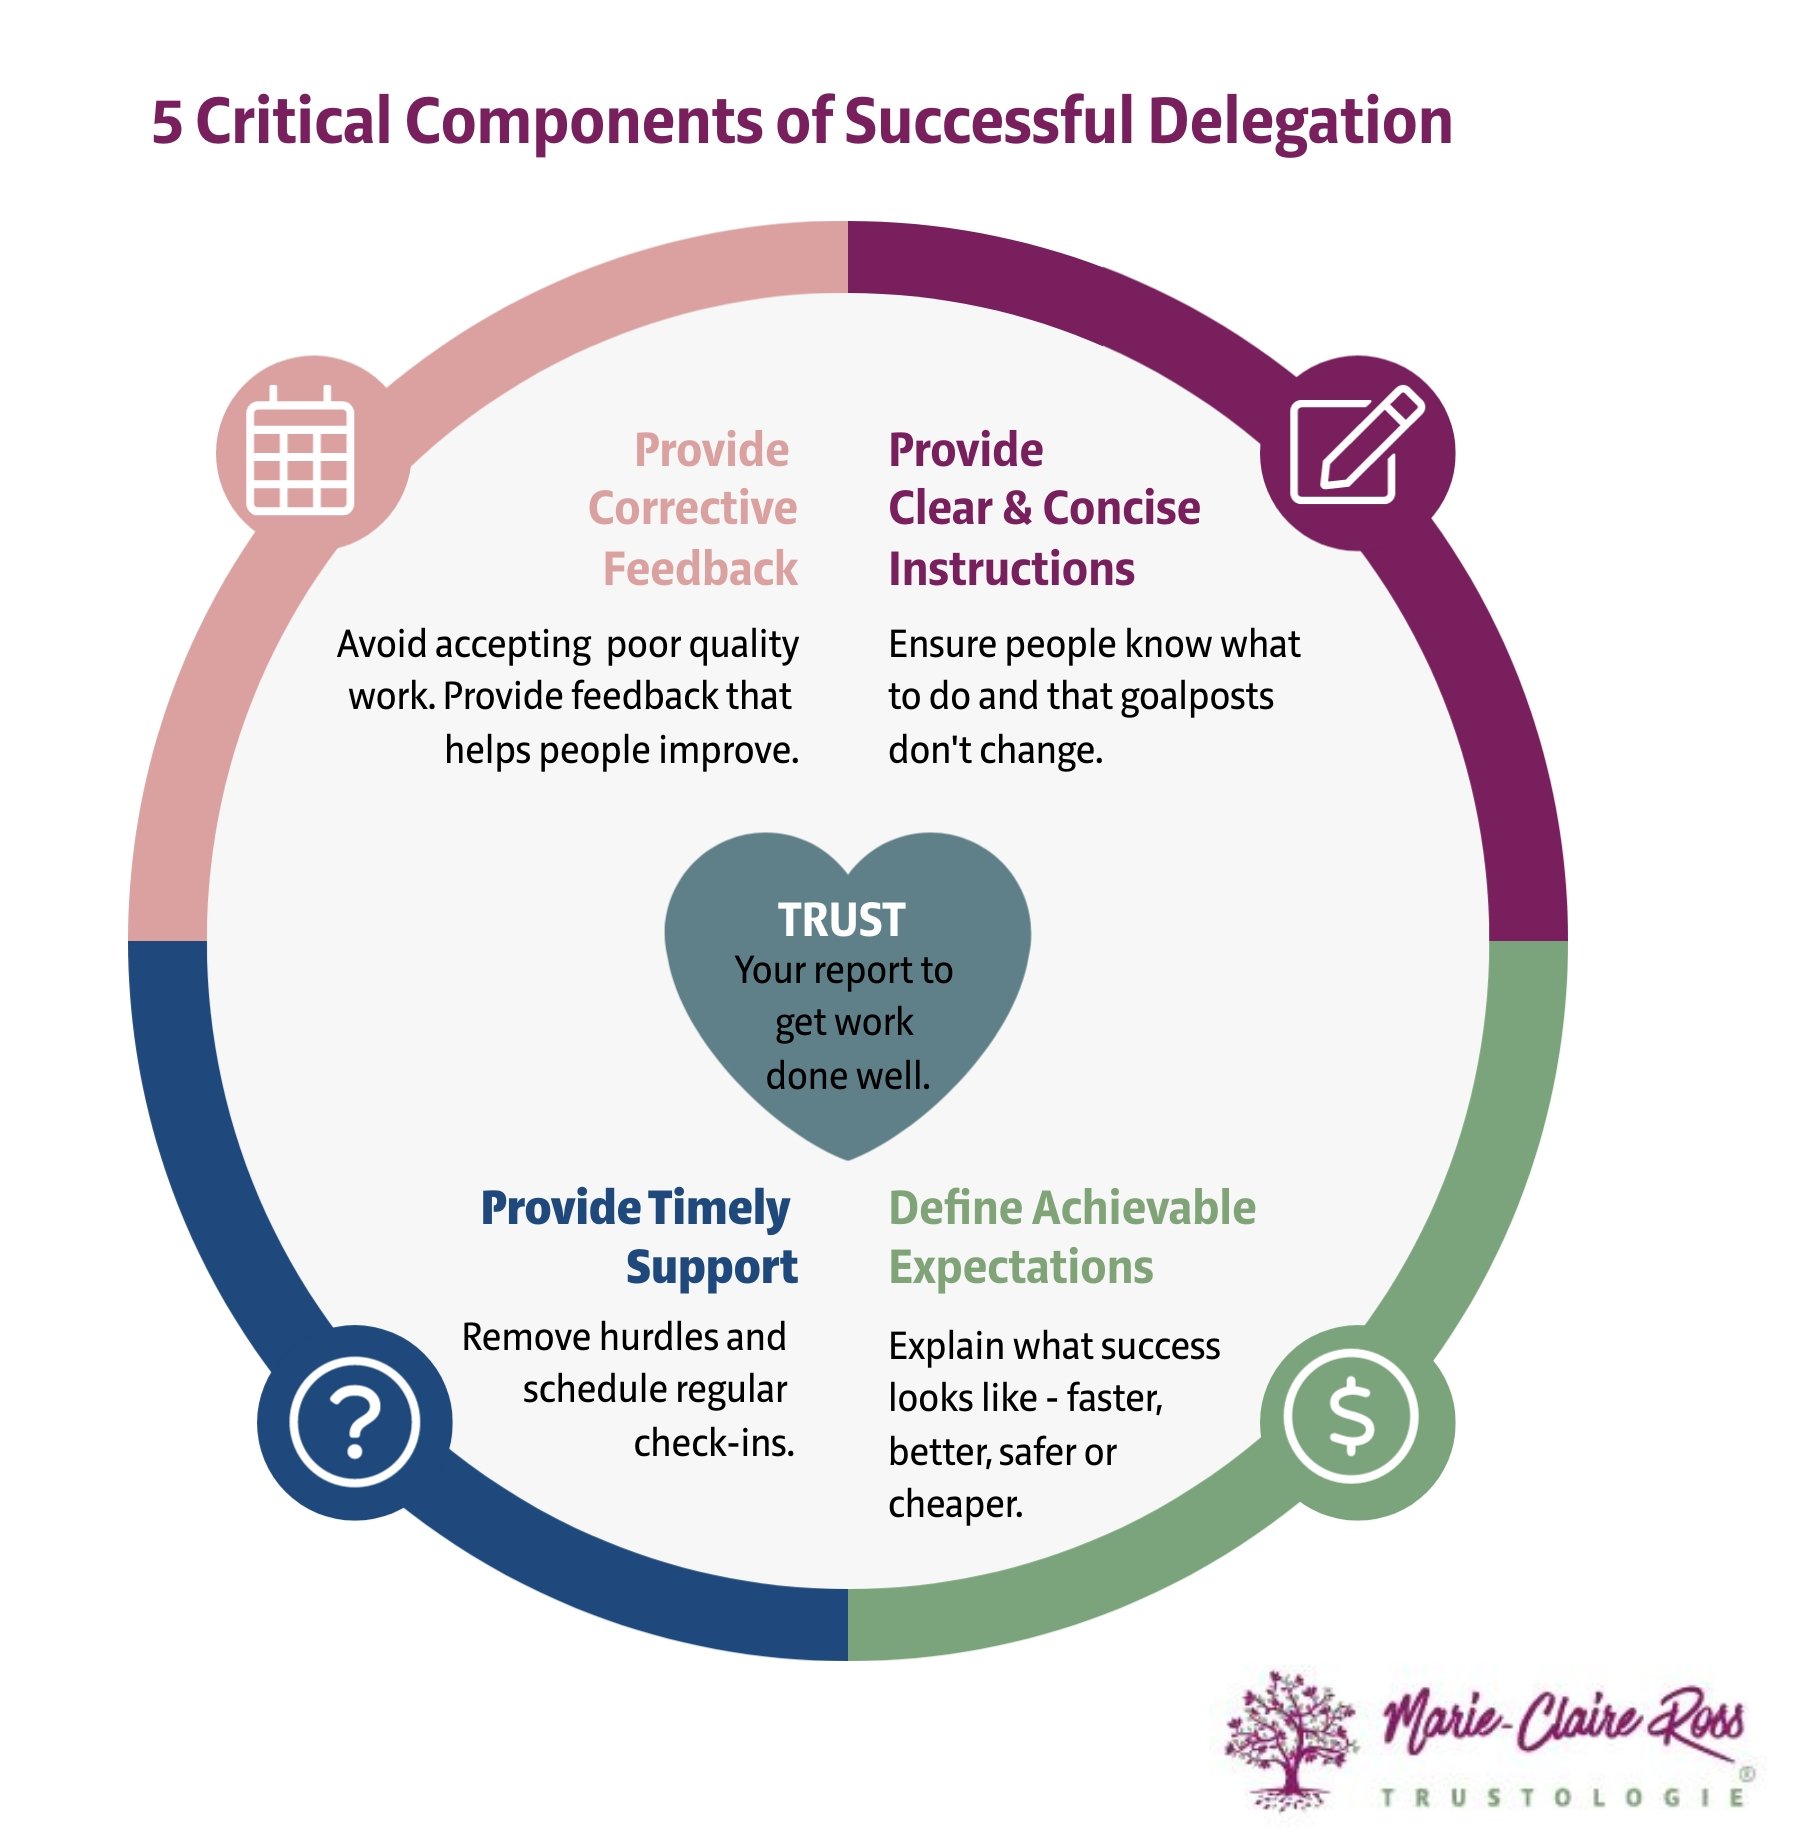 5 Critical Components of Successful Delegation that Improves TRUST